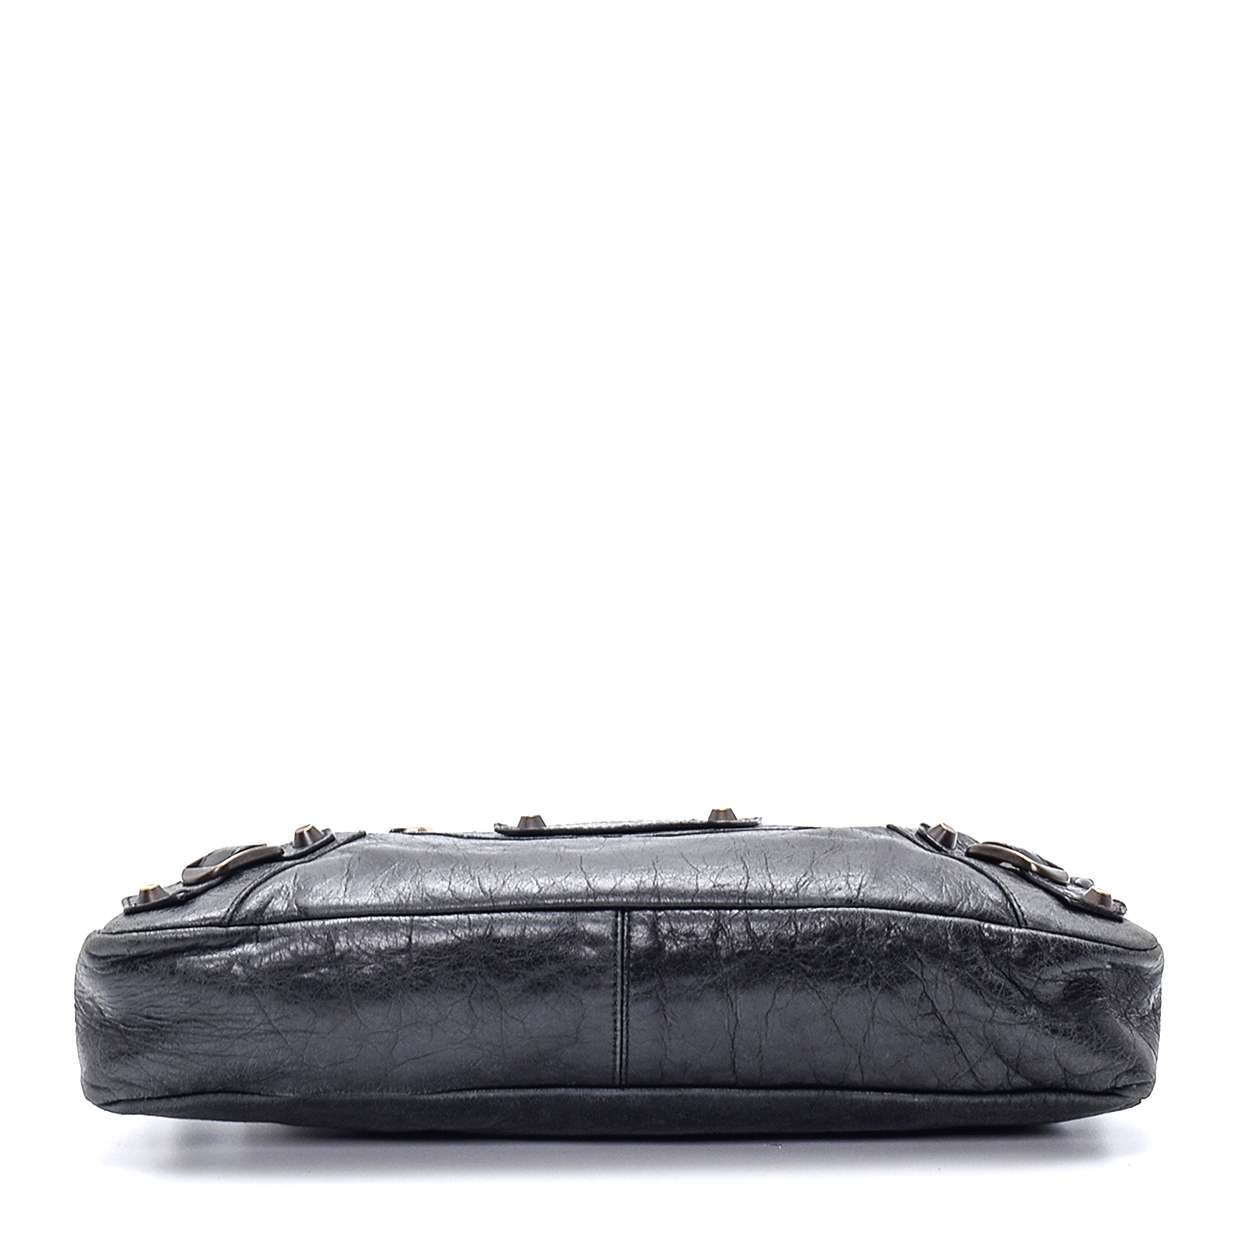 Balenciaga - Anthracite Leather Small Motorcycle City Bag